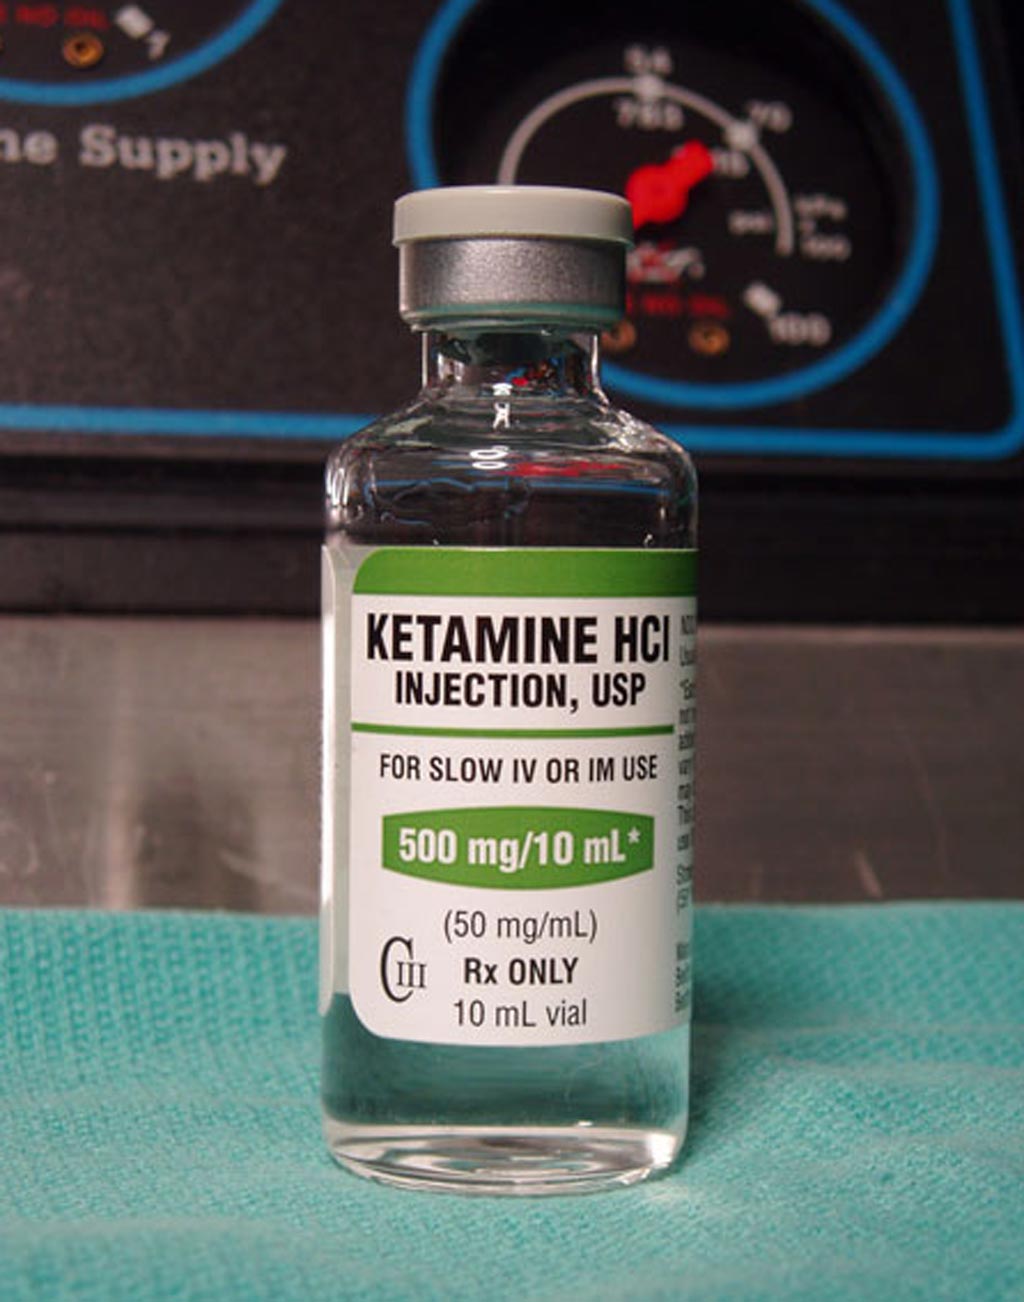 Image: According to a new study, ketamine can rapidly reduce suicidal thoughts in the depressed (Photo courtesy of Erowid).